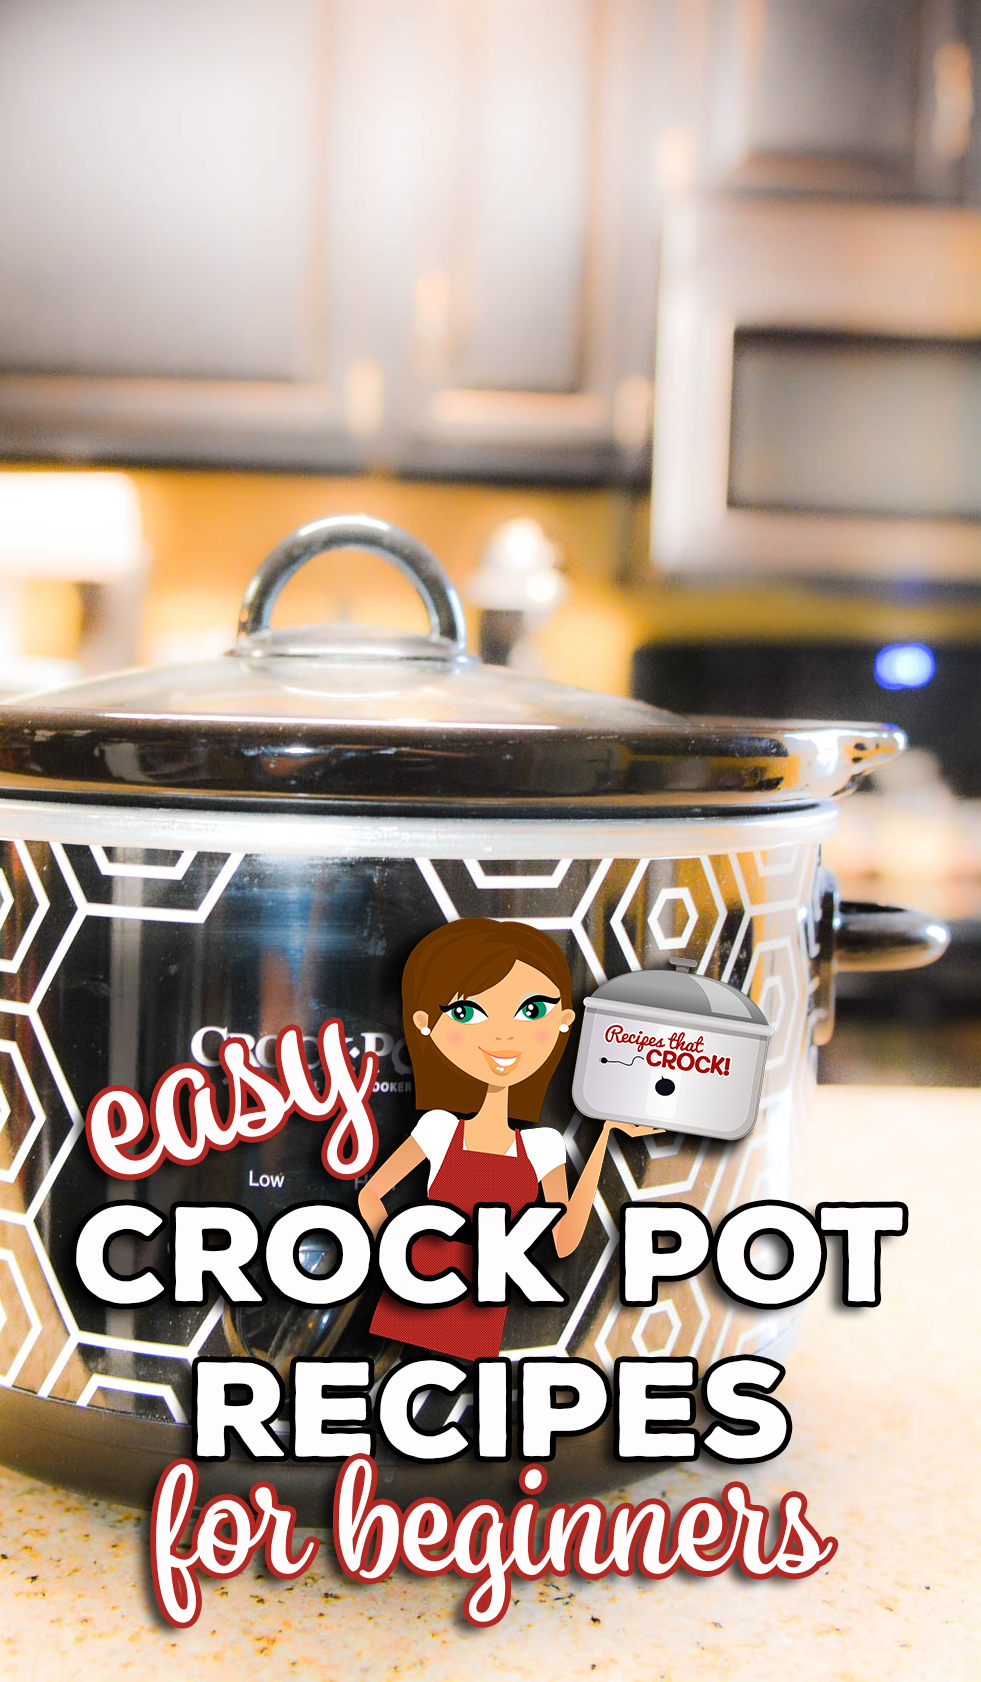 Our Easy Crock Pot Recipes for Beginners are our favorite tried and true slow cooker recipes that turn out great every time! If you are looking for easy fail-proof crock pot recipes, these are the dishes for you!